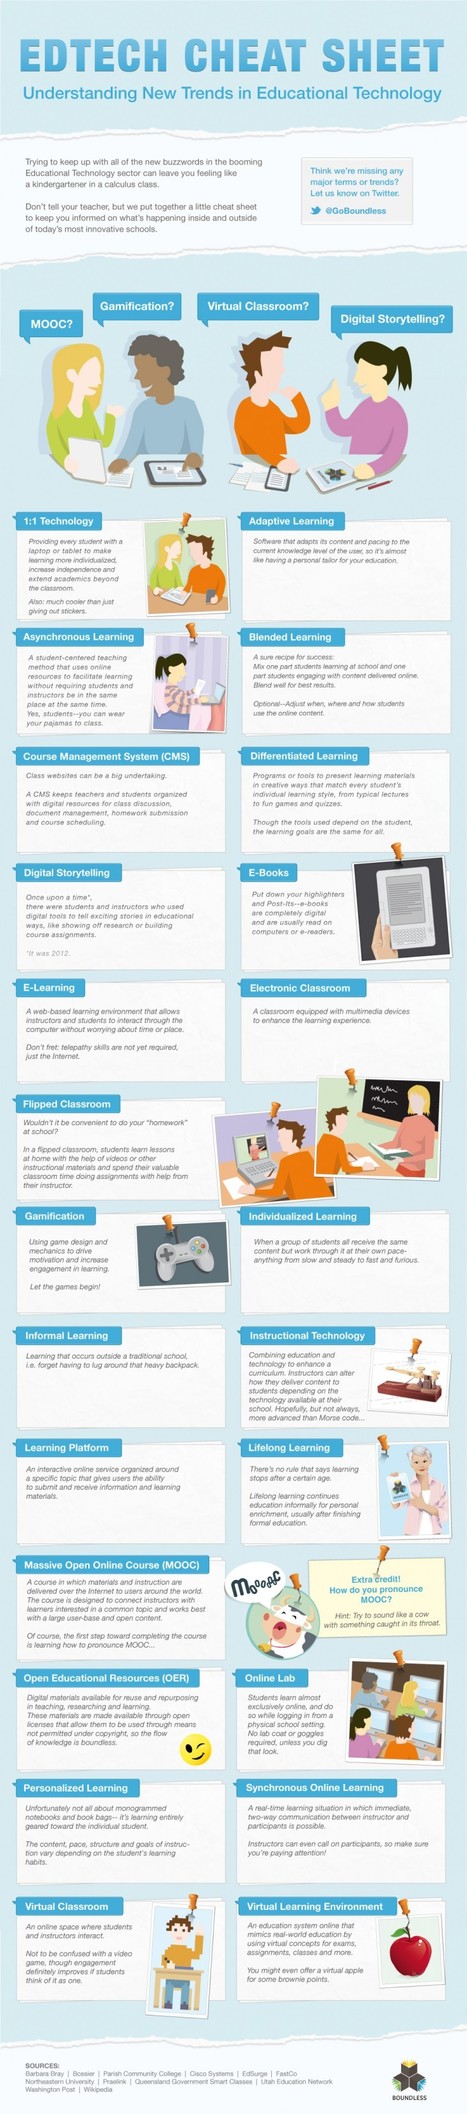 The Must-Have EdTech Cheat Sheet [Infographic] | Daily Magazine | Scoop.it